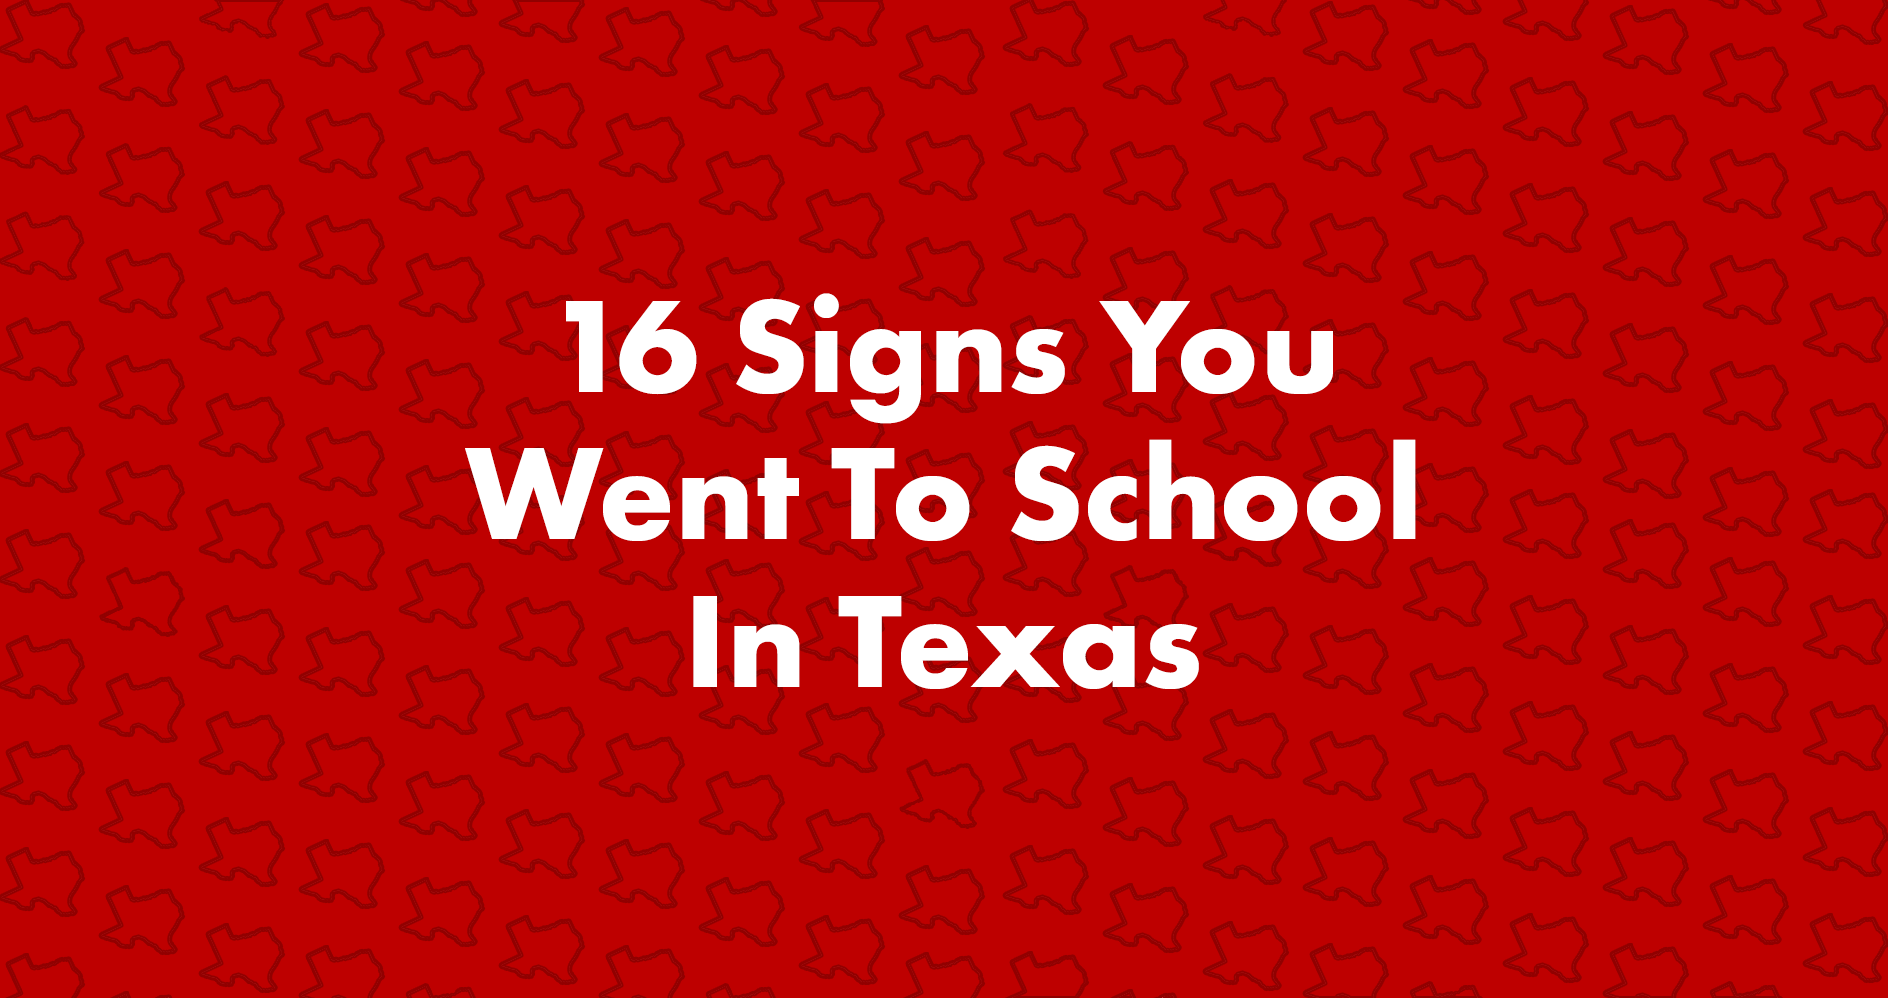 16 Signs You Went To School In Texas